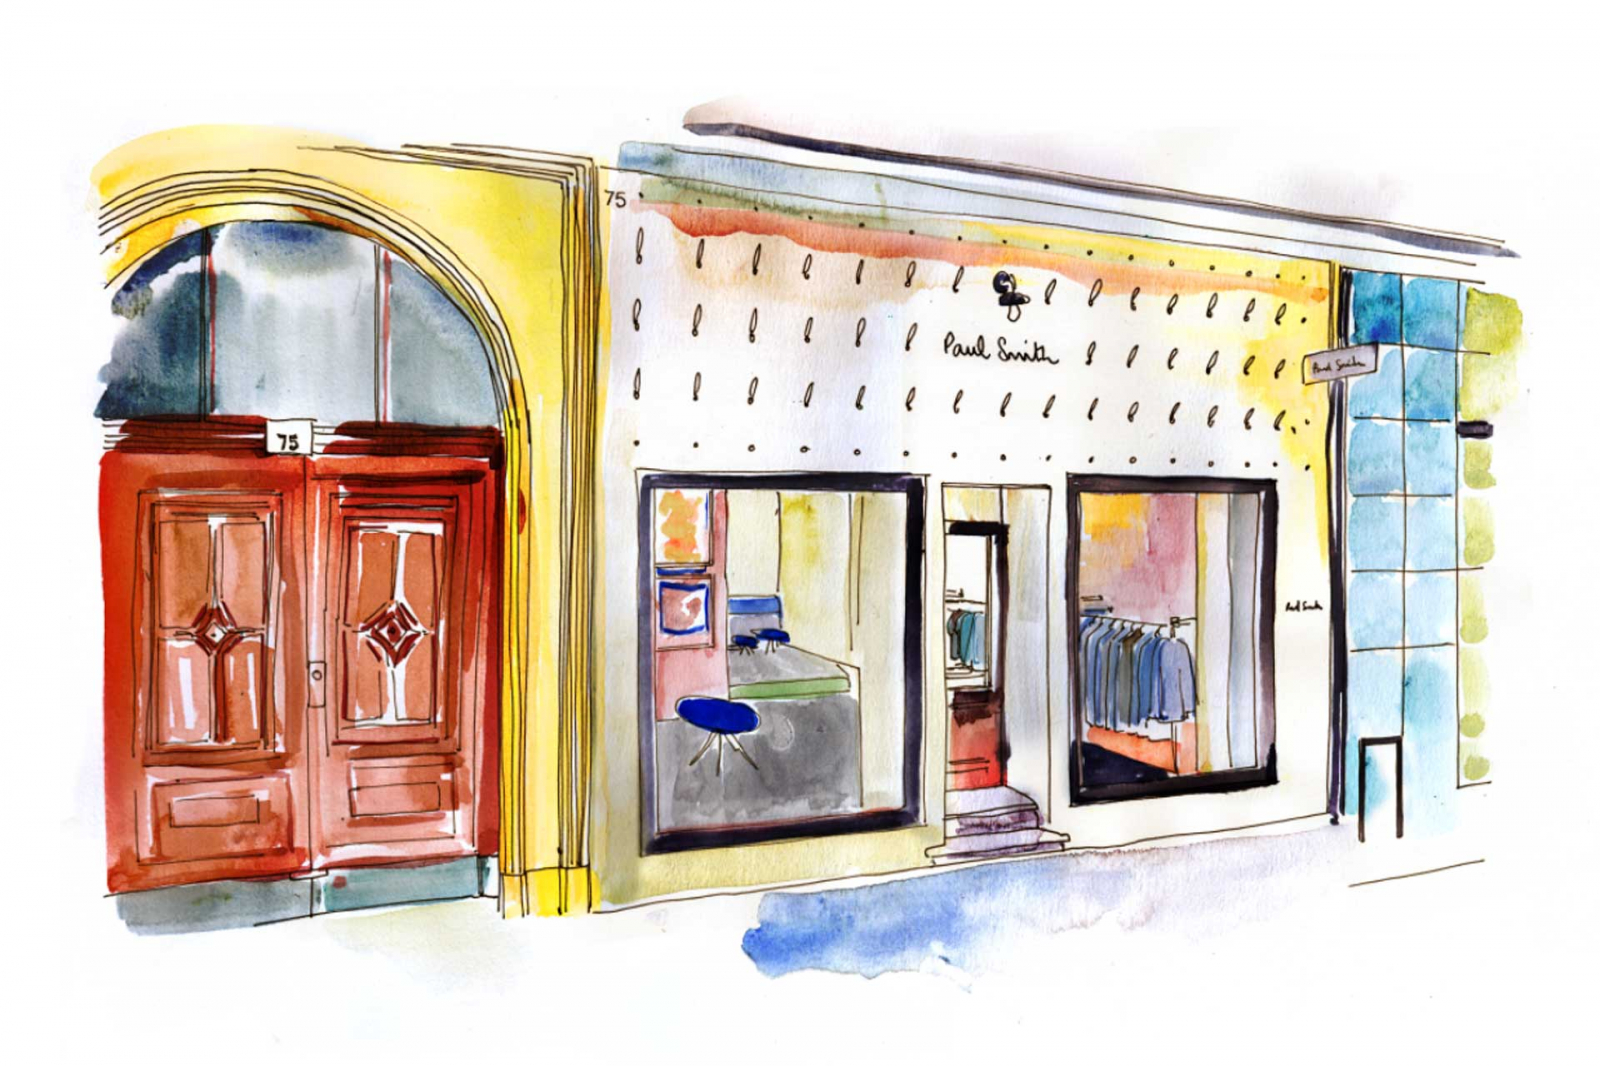 An artists impression of the new Paul Smith boutique in Berlin (Photo: Paul Smith)